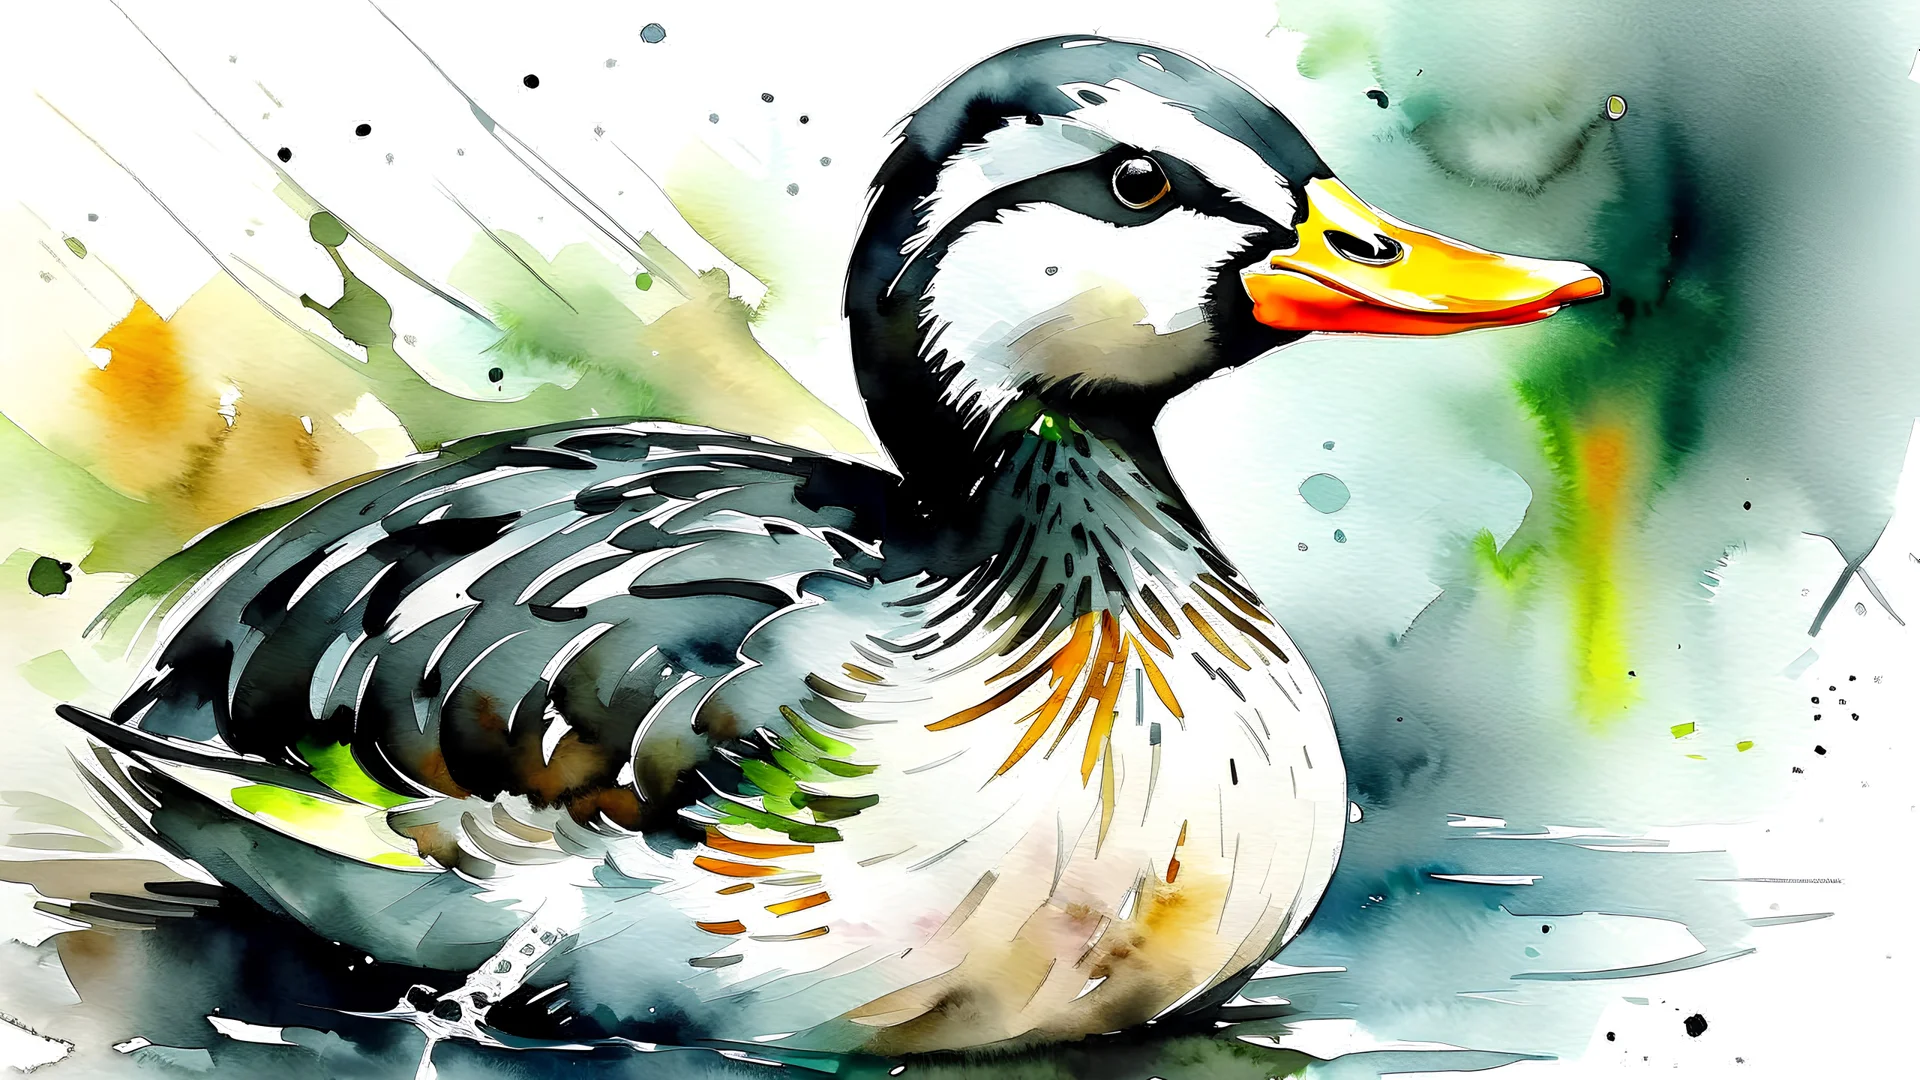 watercolour painting of a duck